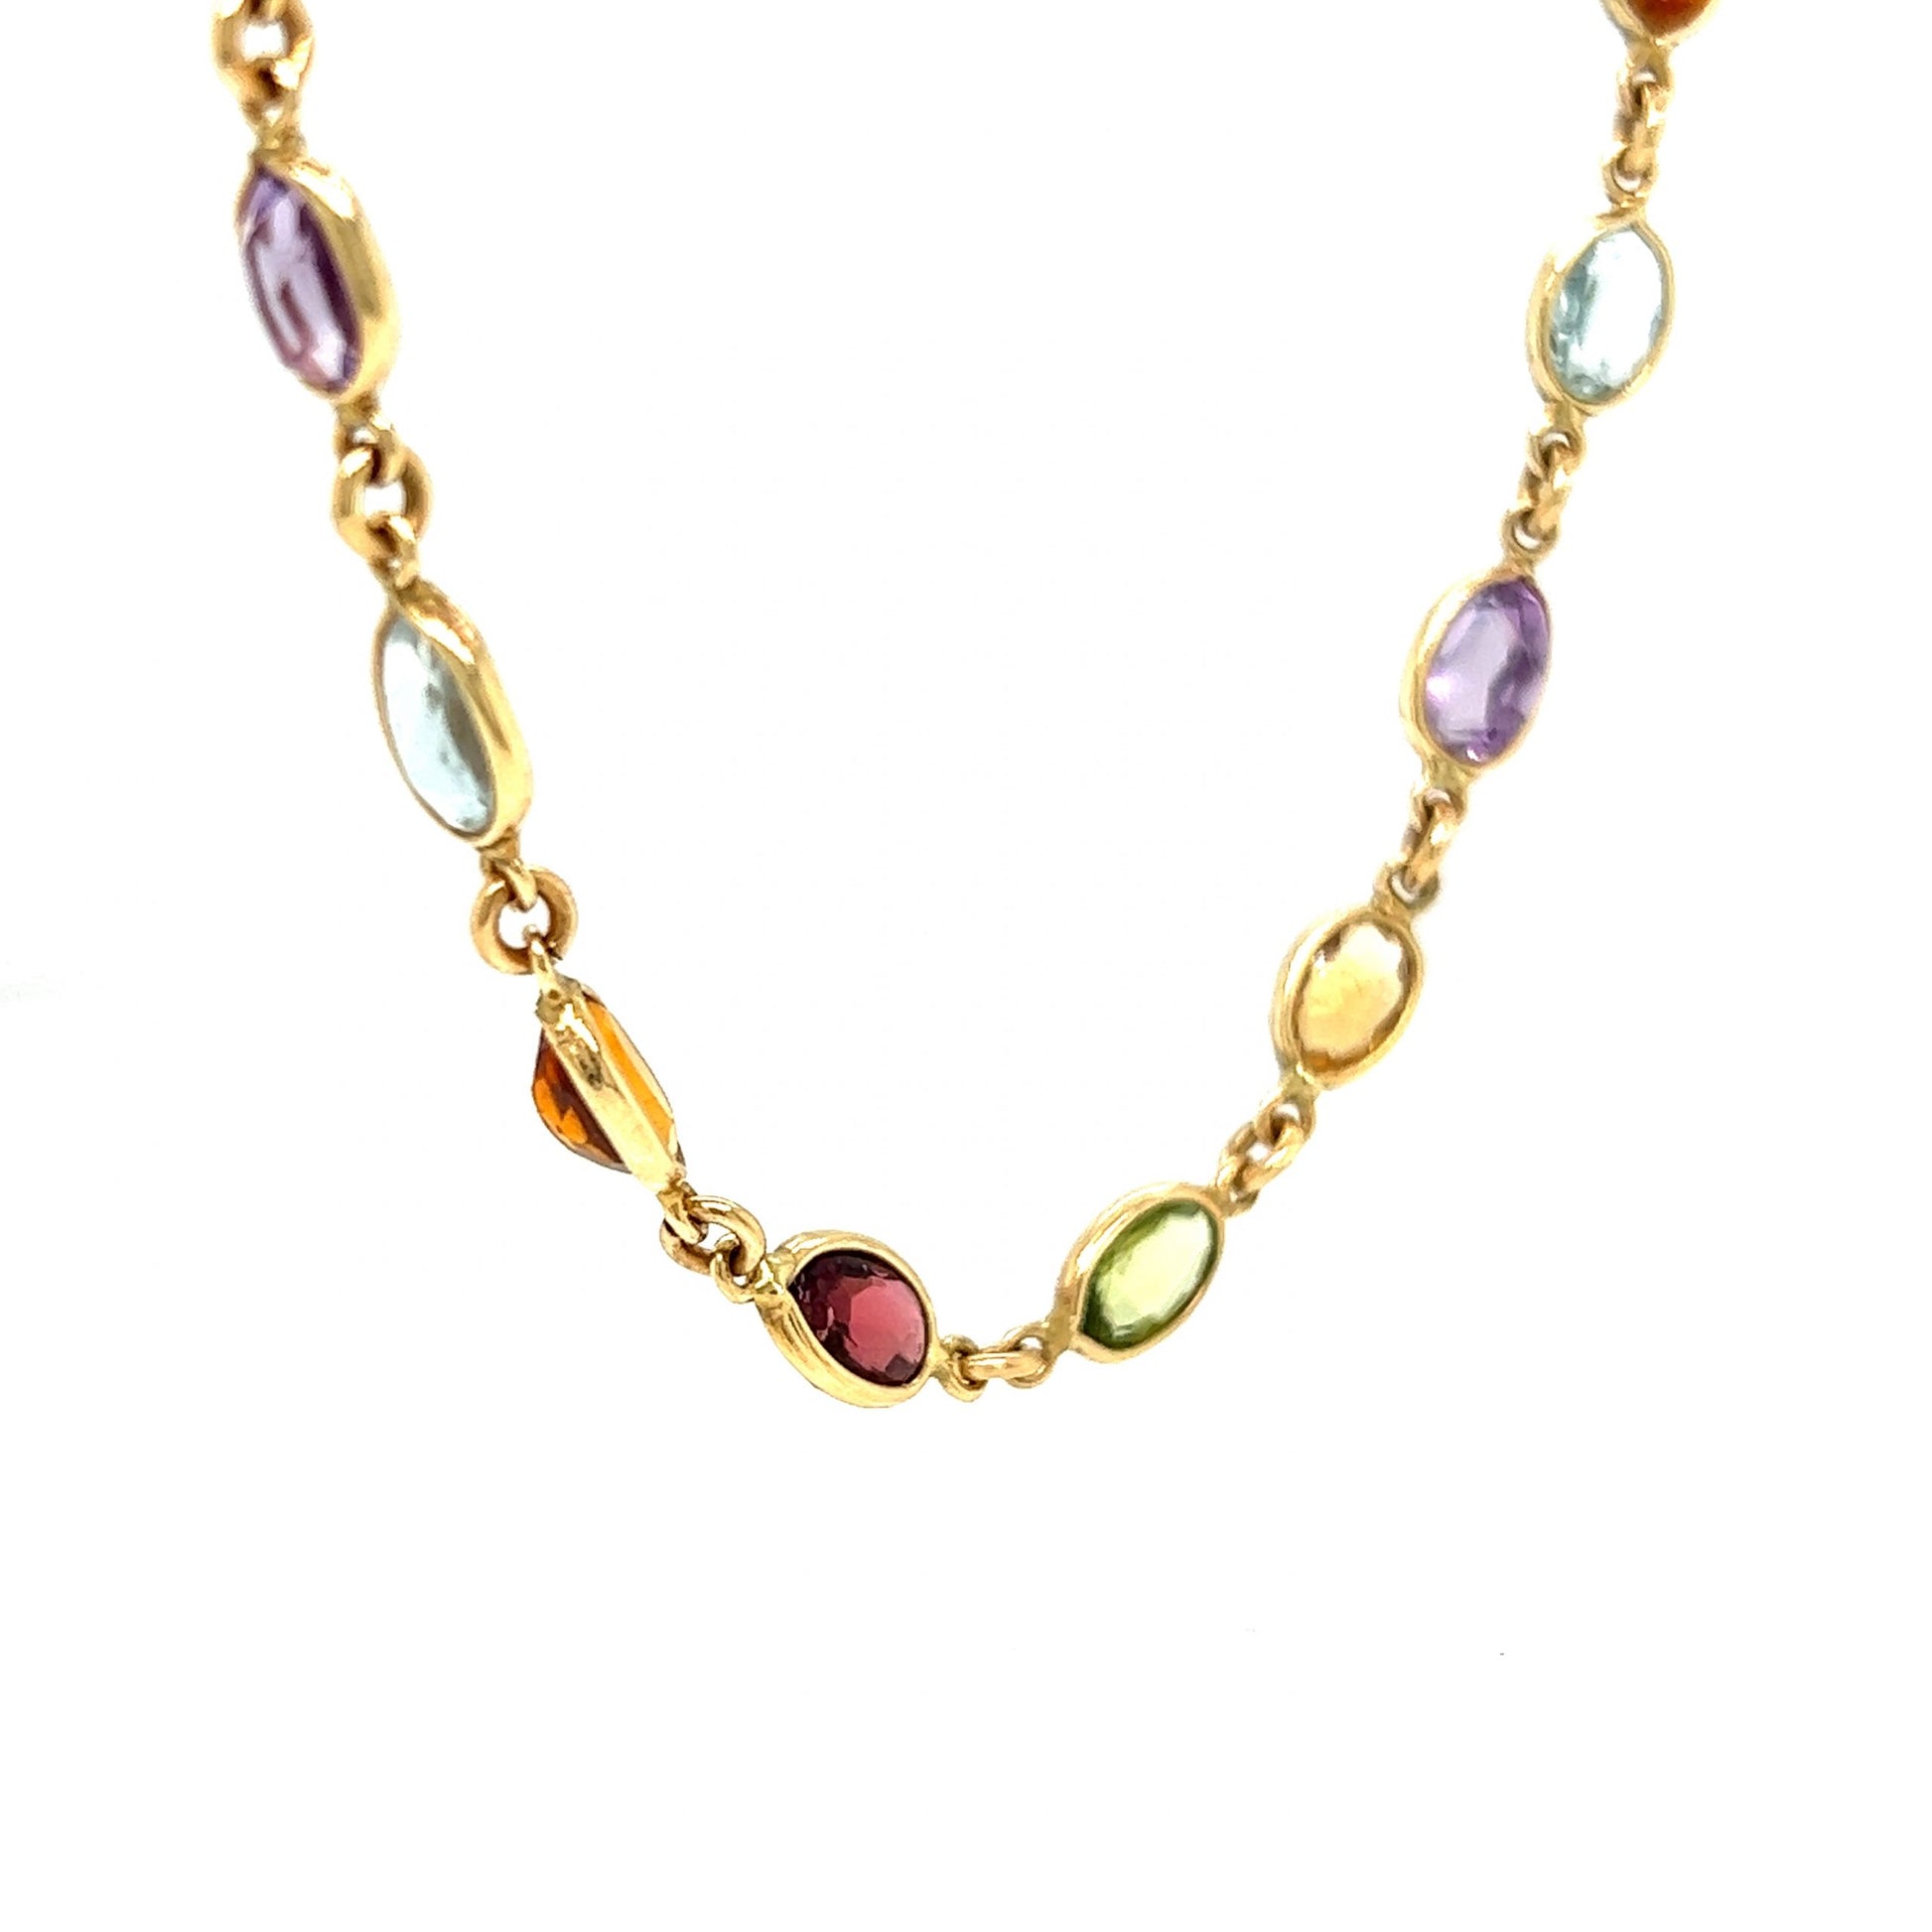 Multi-Color Gemstone Necklace in 14k Yellow GoldComposition: 14 Karat Yellow Gold Total Gram Weight: 14.3 g Inscription: 14k  ITALY
      